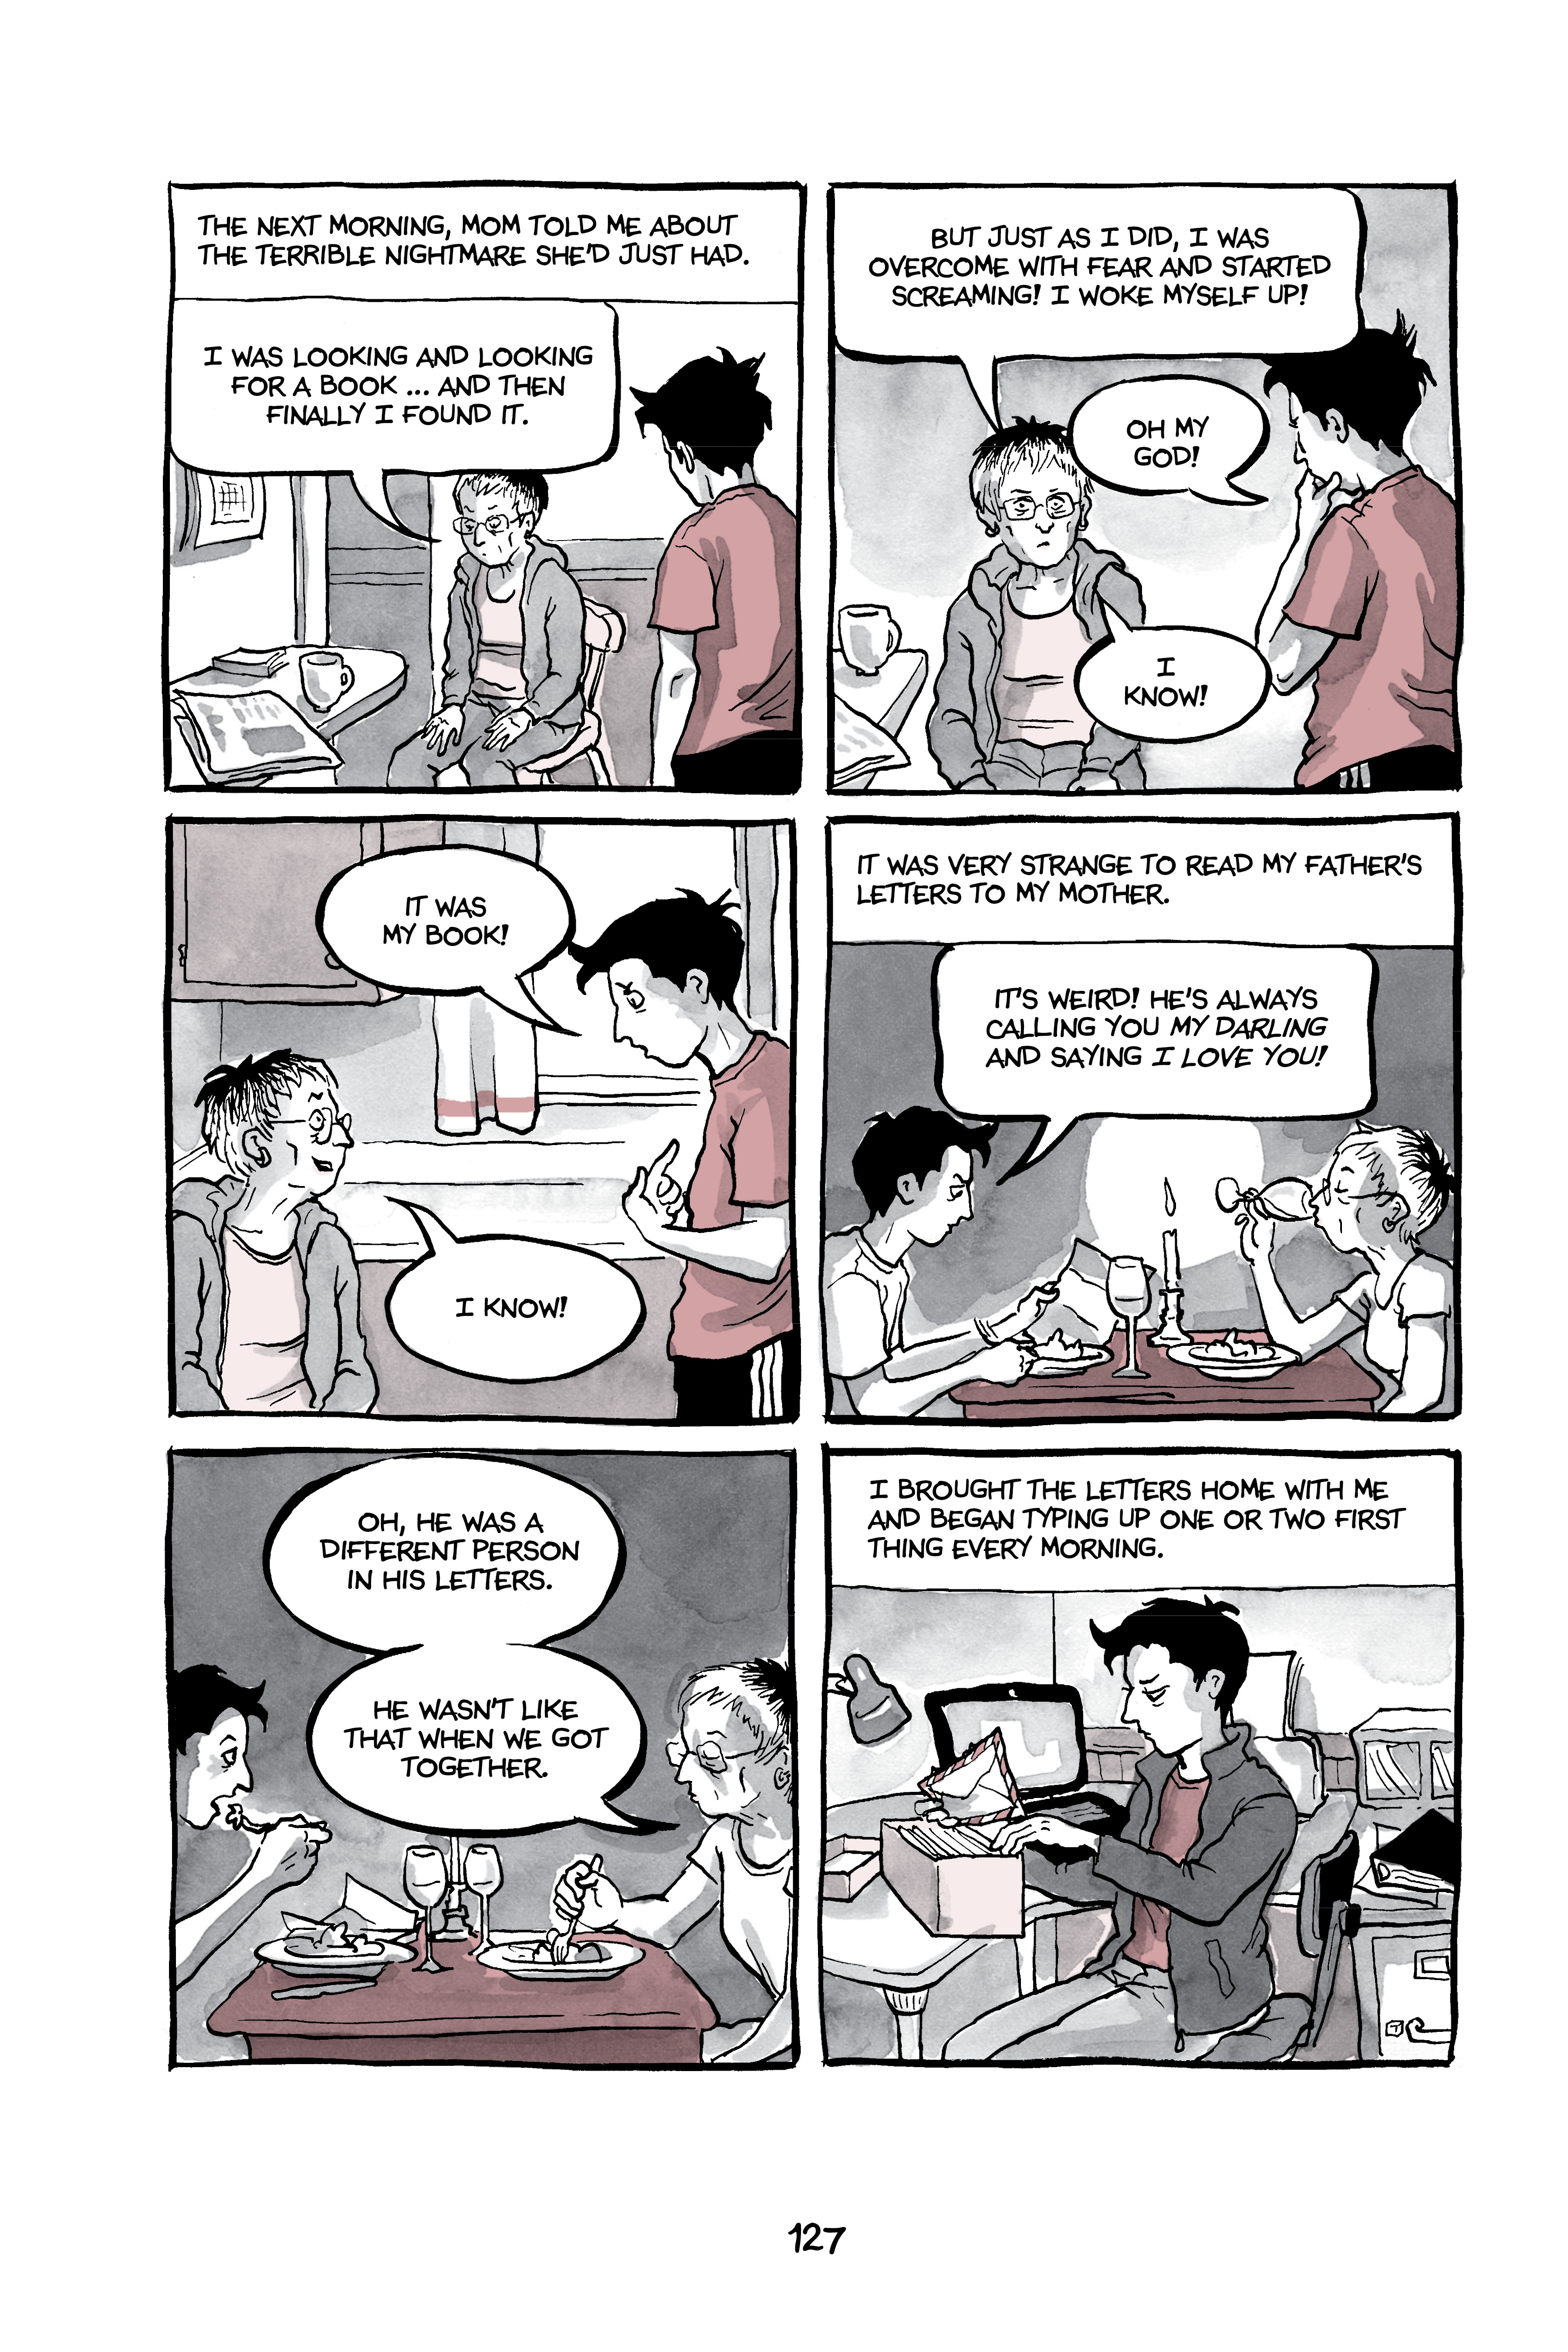 The Paris Review - Family Matters: Alison Bechdel on 'Are You My Mother?' -  The Paris Review